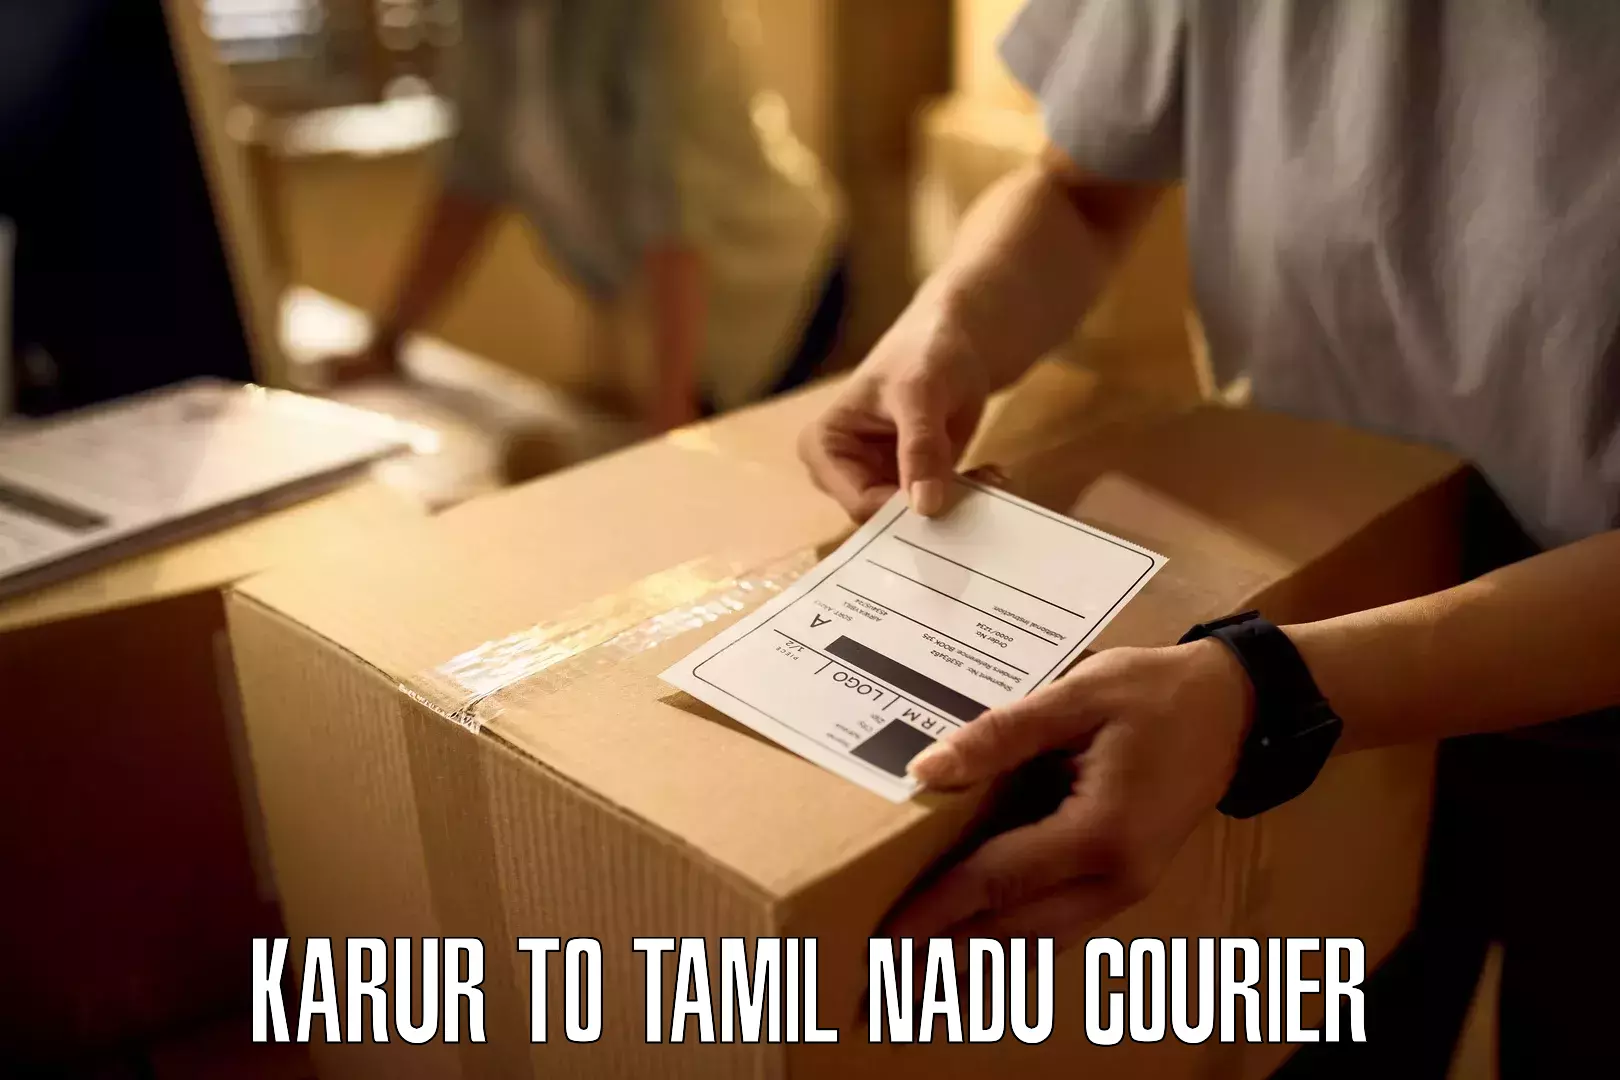 Next-day delivery options Karur to Karur